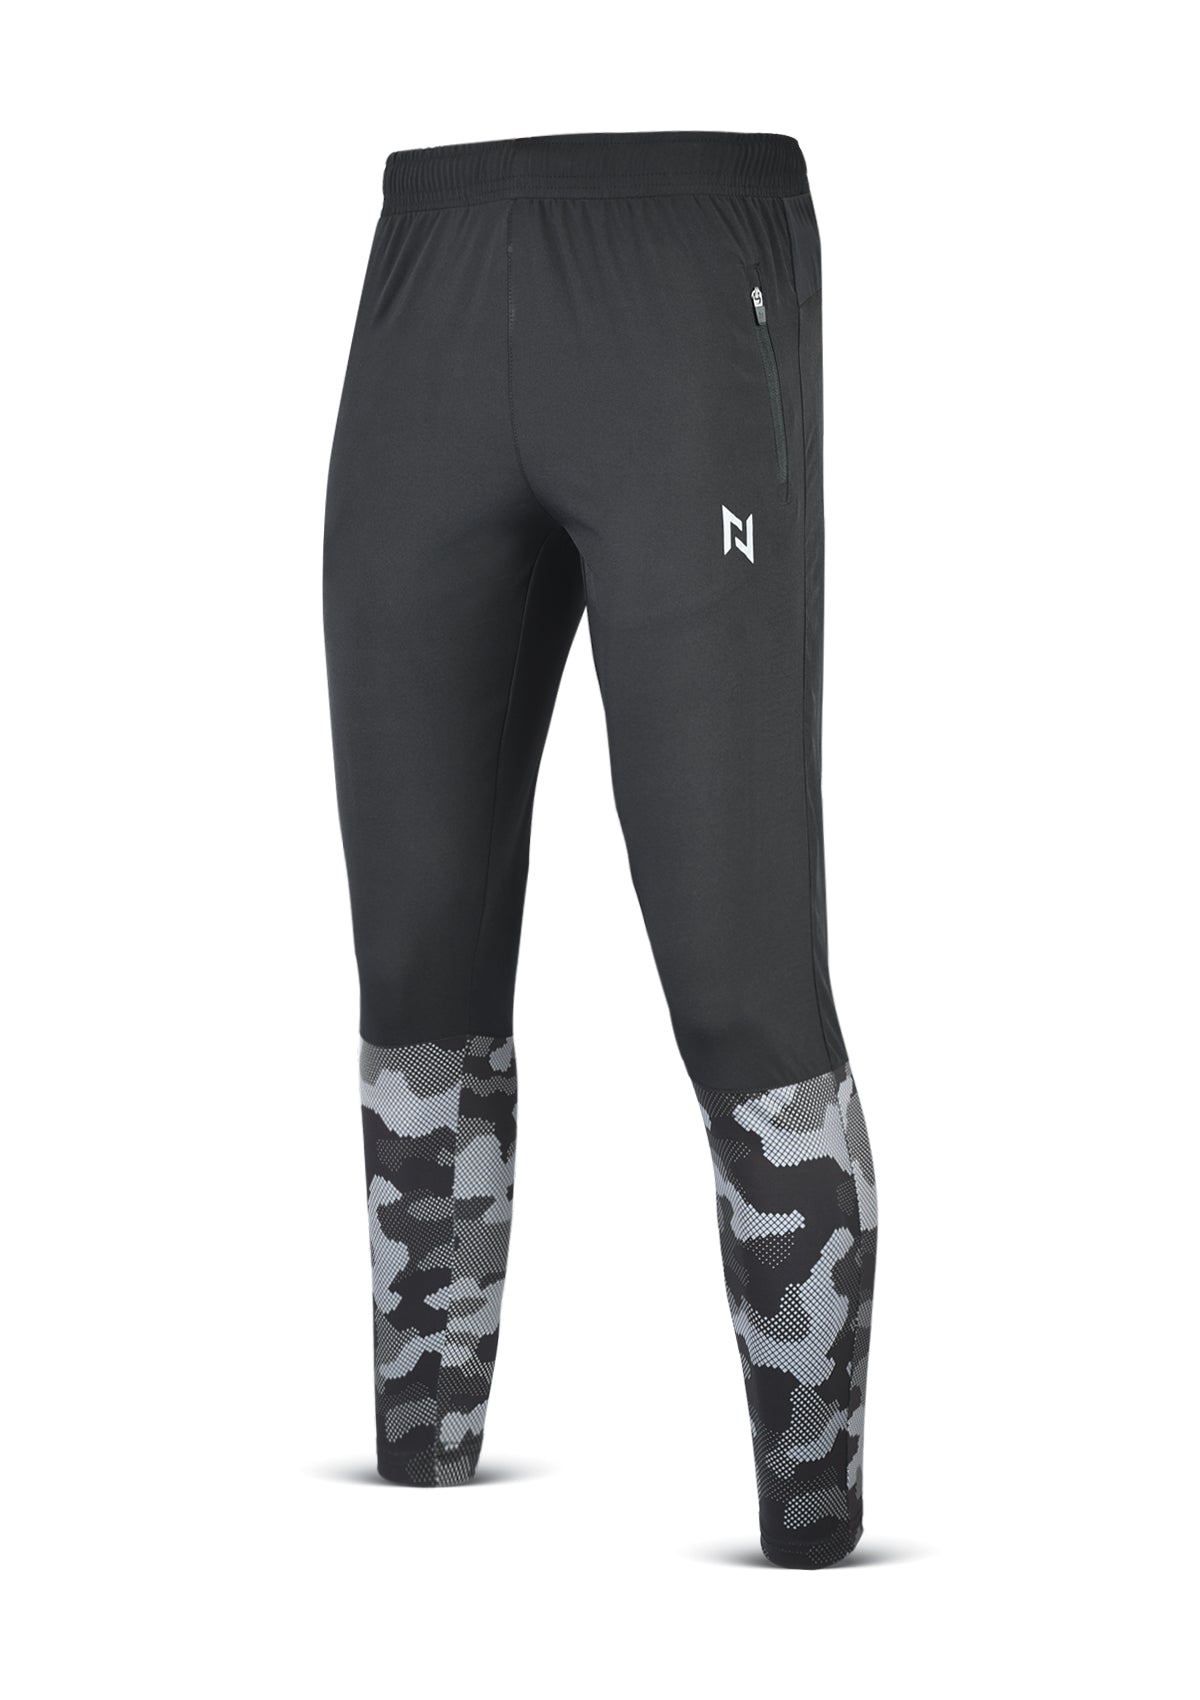 HYBRID PRO TROUSERS - Nomad Apparel